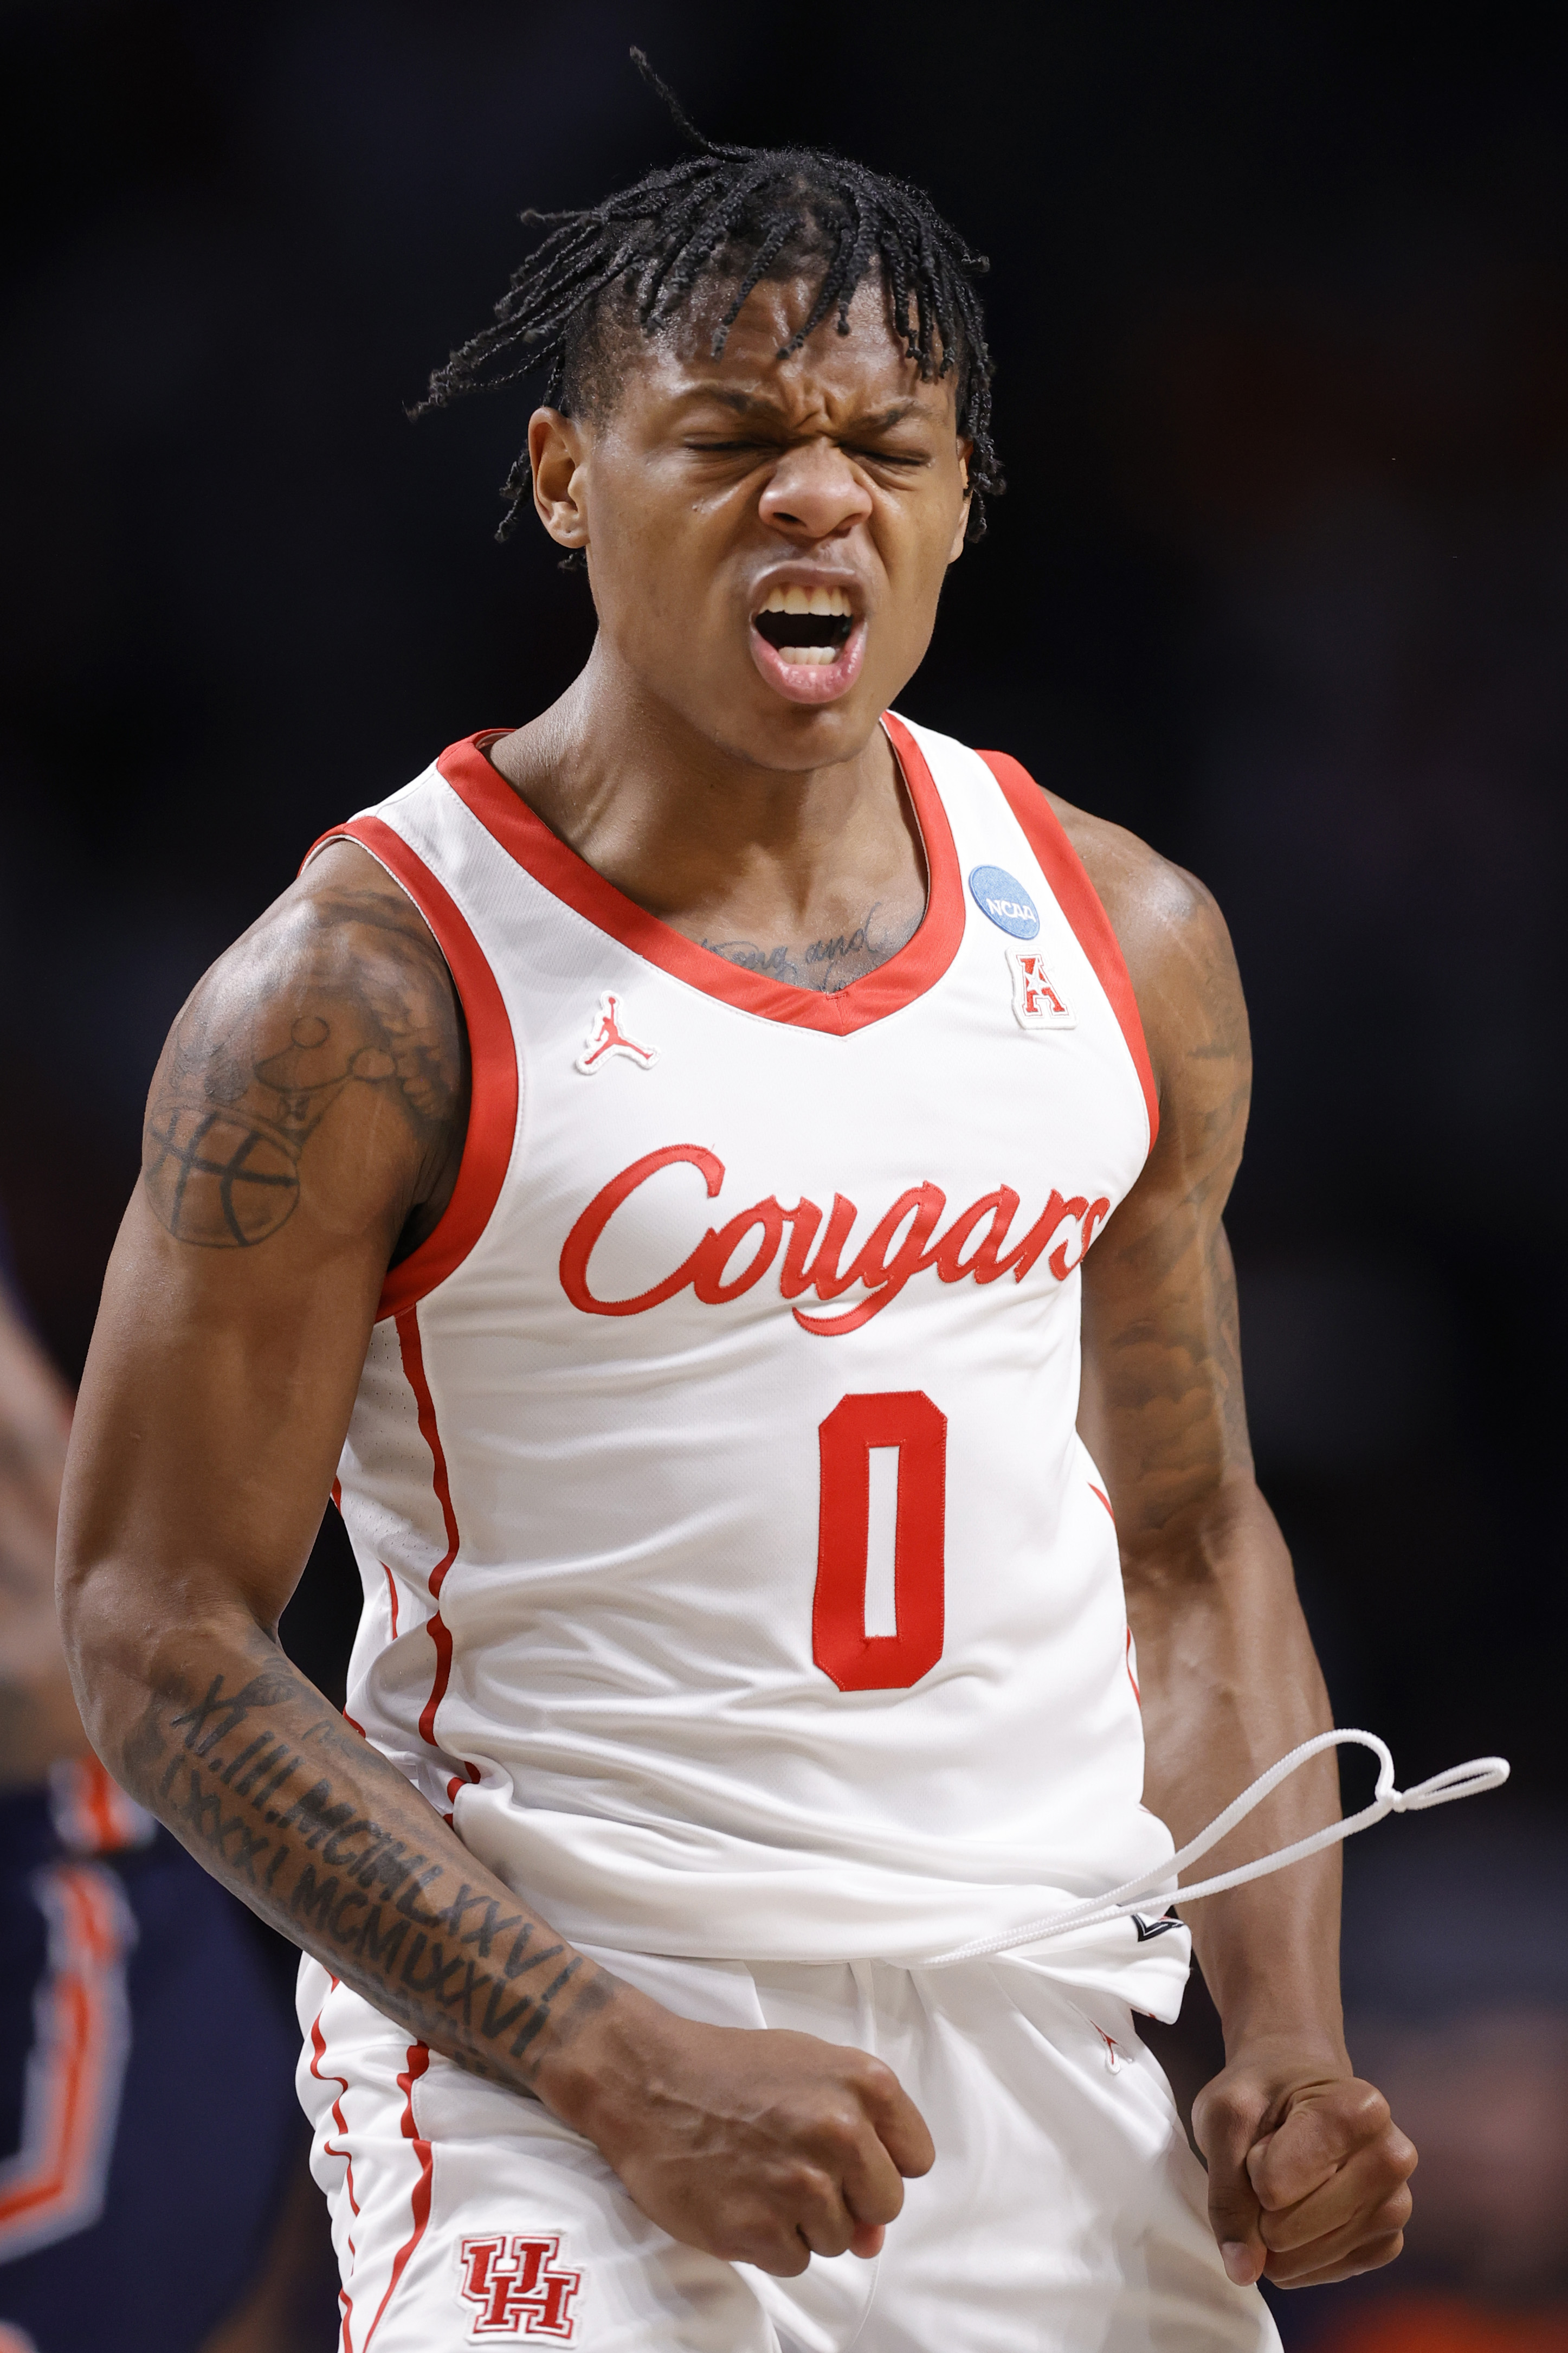 Marcus Sasser #0 of the Houston Cougars reacts after a basket during the first half against the Auburn Tigers in the second round of the NCAA Men’s Basketball Tournament at Legacy Arena at the BJCC on March 18, 2023 in Birmingham, Alabama.